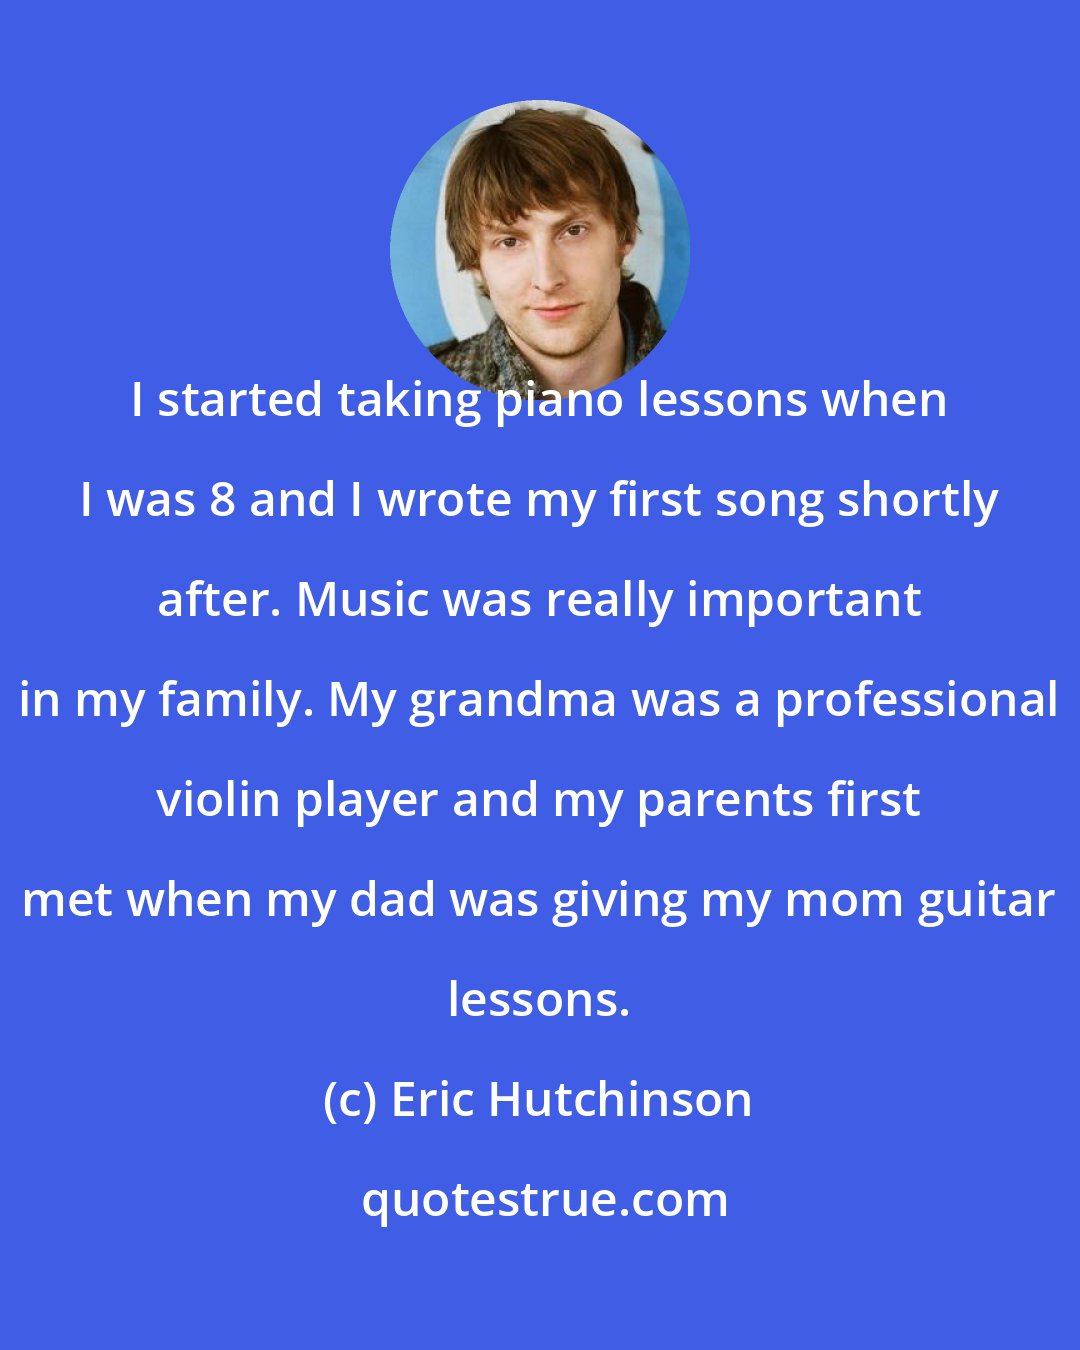 Eric Hutchinson: I started taking piano lessons when I was 8 and I wrote my first song shortly after. Music was really important in my family. My grandma was a professional violin player and my parents first met when my dad was giving my mom guitar lessons.